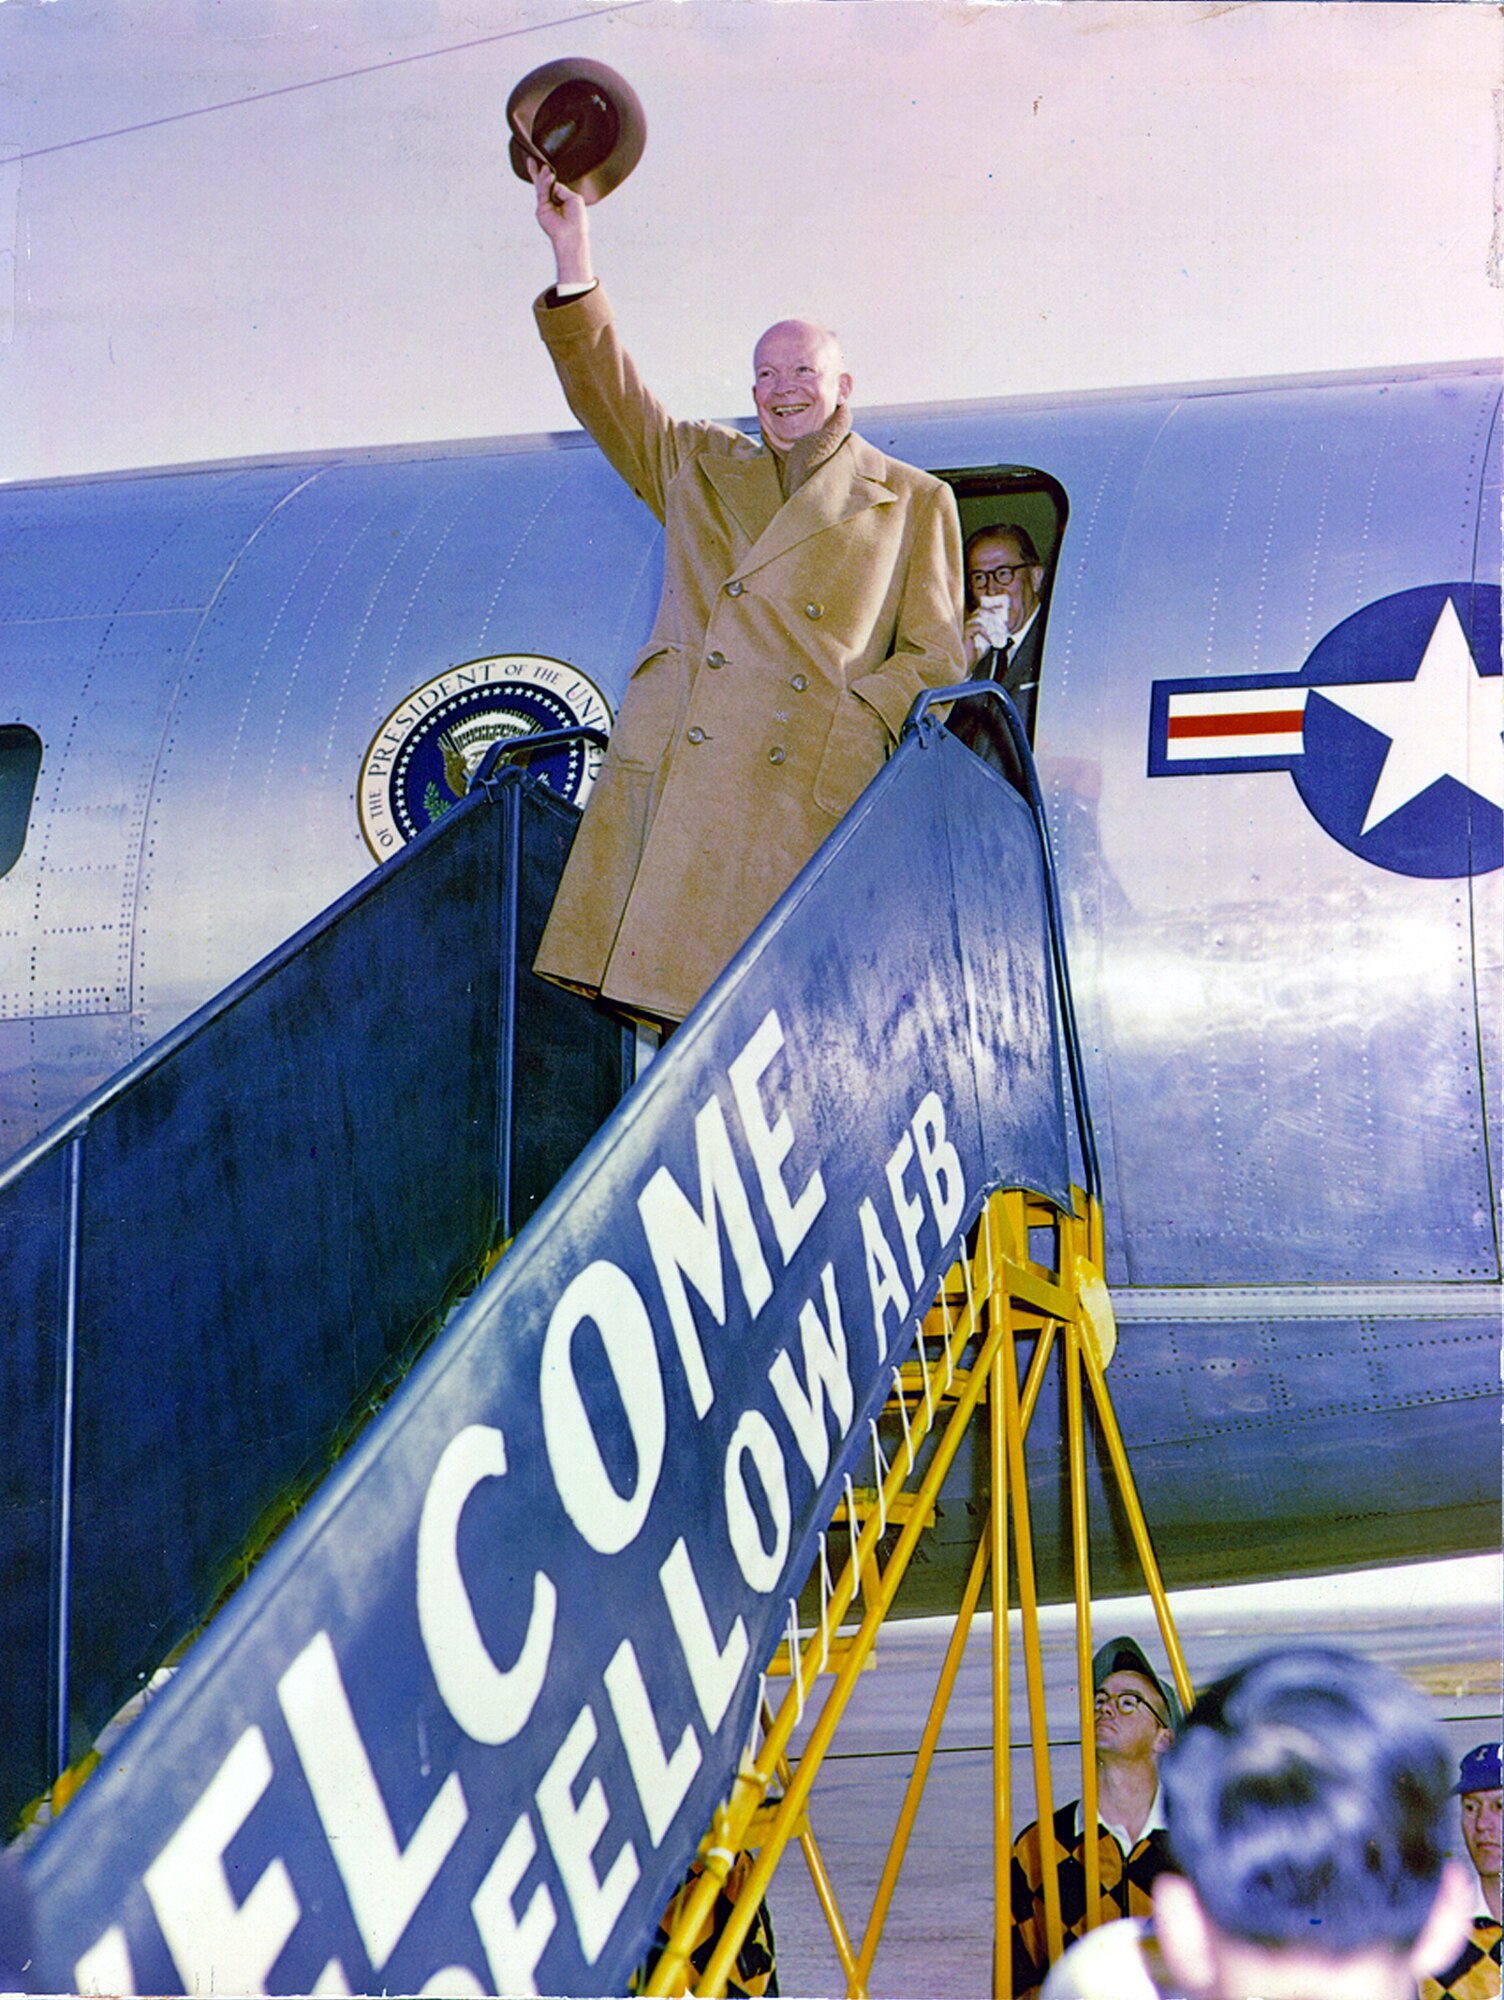 President Dwight D. Eisenhower visited Goodfellow Air Force Base in January 1957 in order to inspect the severe drought conditions West Texas experienced during that time.  According to Dr. John Garret, 17th Training Wing Historian, President Eisenhower spent the night at the base and is the only commander in chief to have visited Goodfellow. (U.S. Air Force photo courtesy of 17th Training Wing Historian)